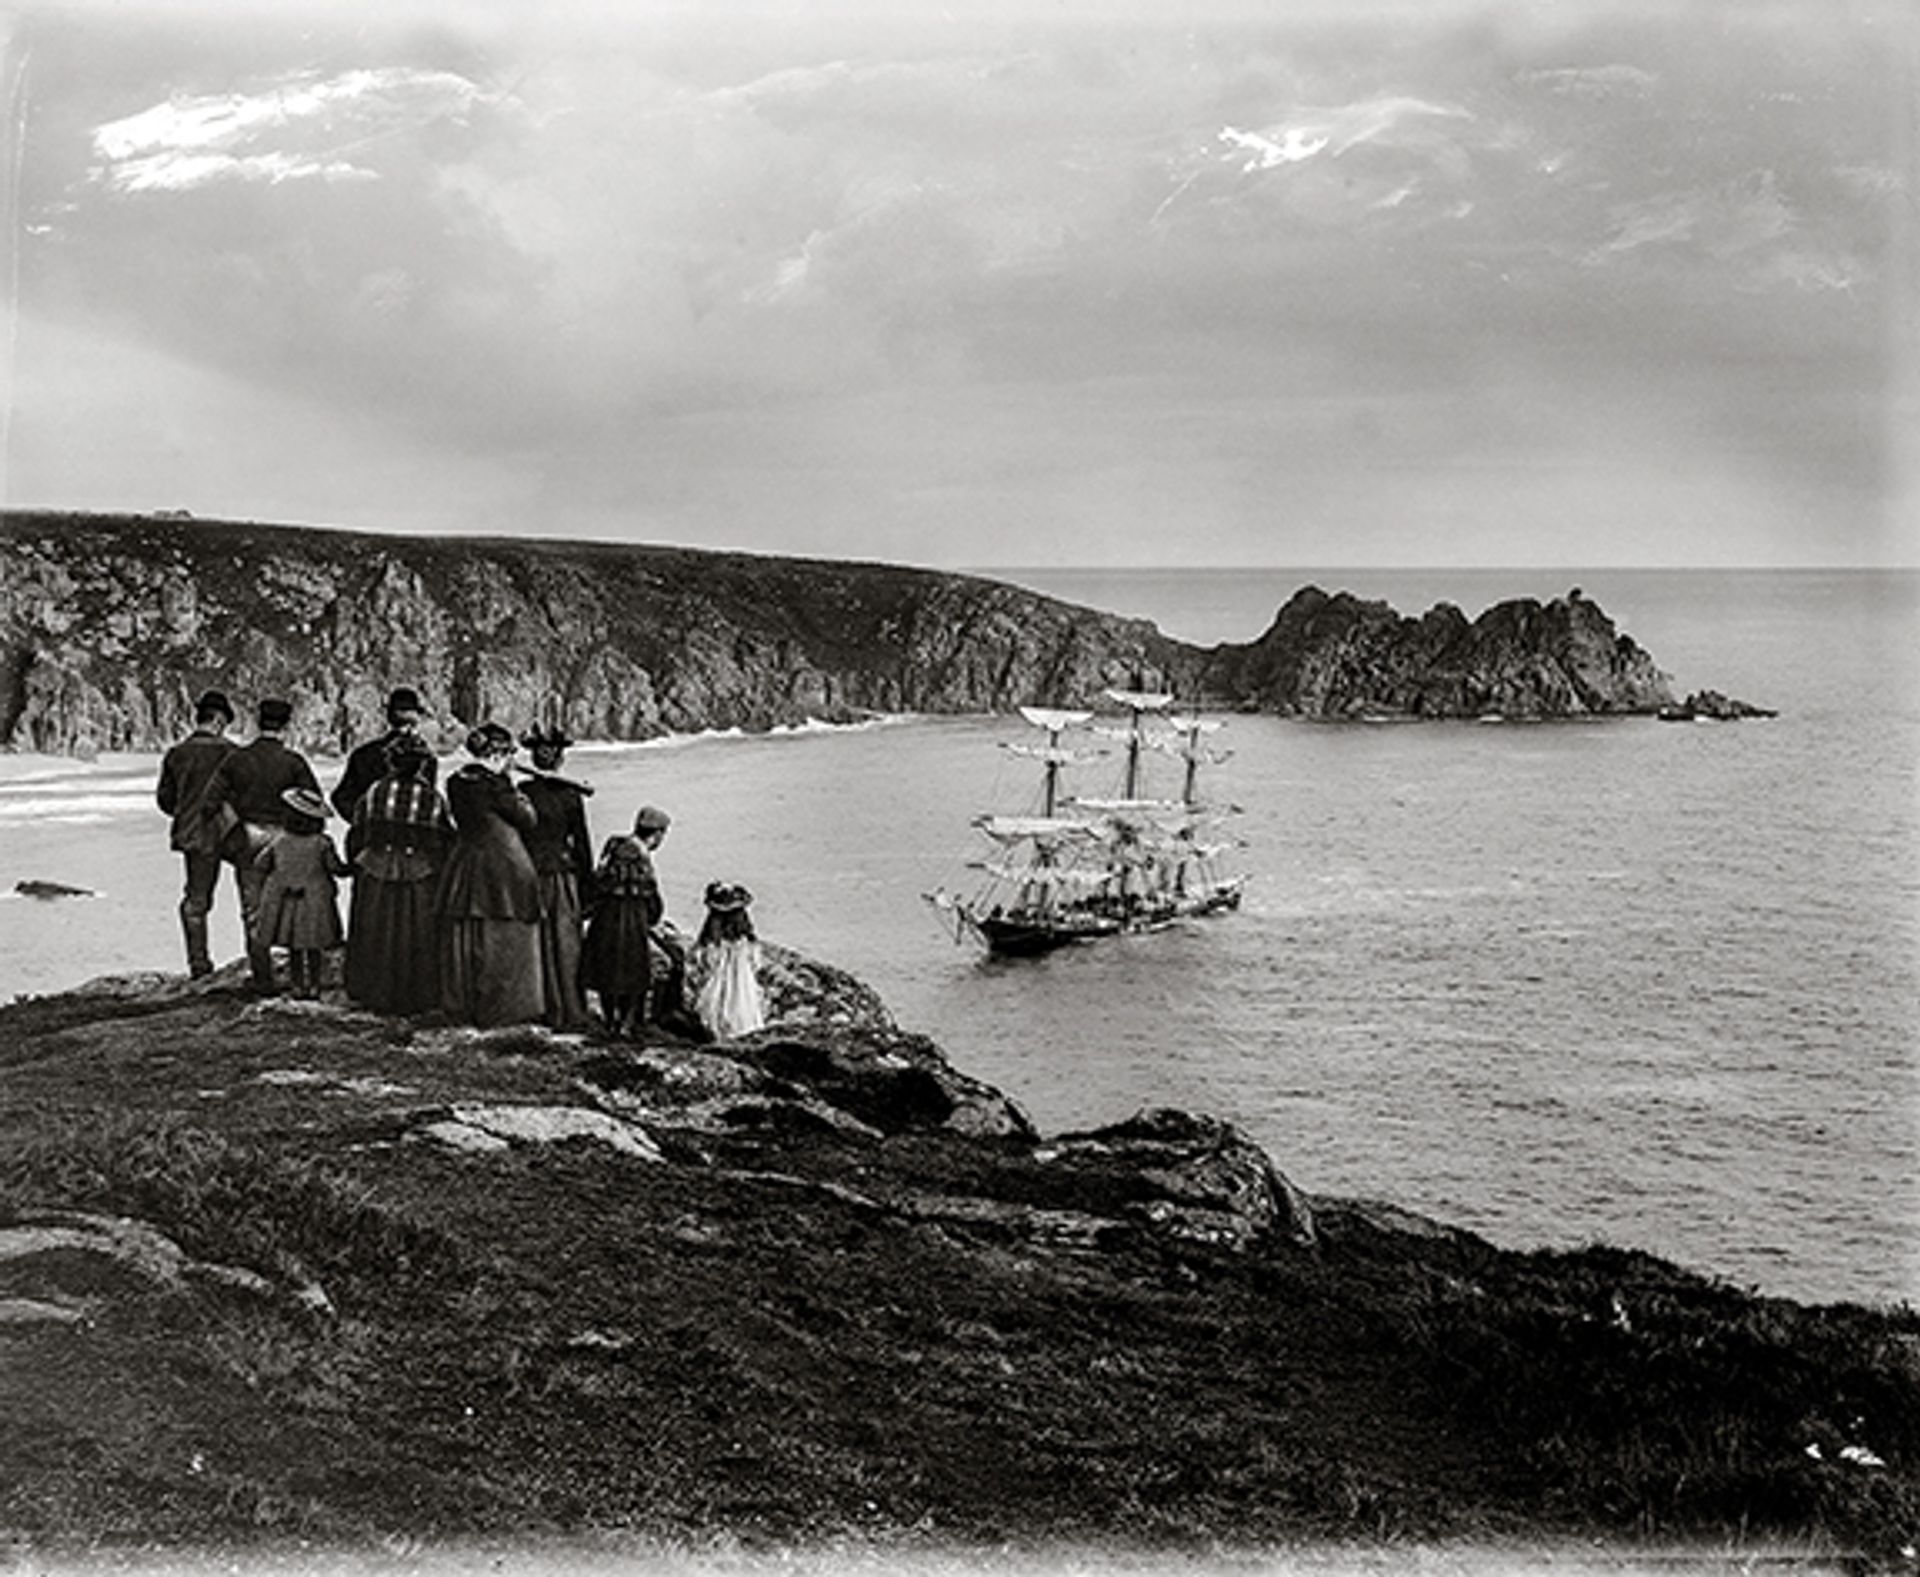 The Granite State was wrecked off Gwennap Head, Cornwall in 1895. A report in the Cornishman newspaper referred to the “promptness” with which the Gibsons arrived at the scene © The Gibsons of Scilly, the National Maritime Museum